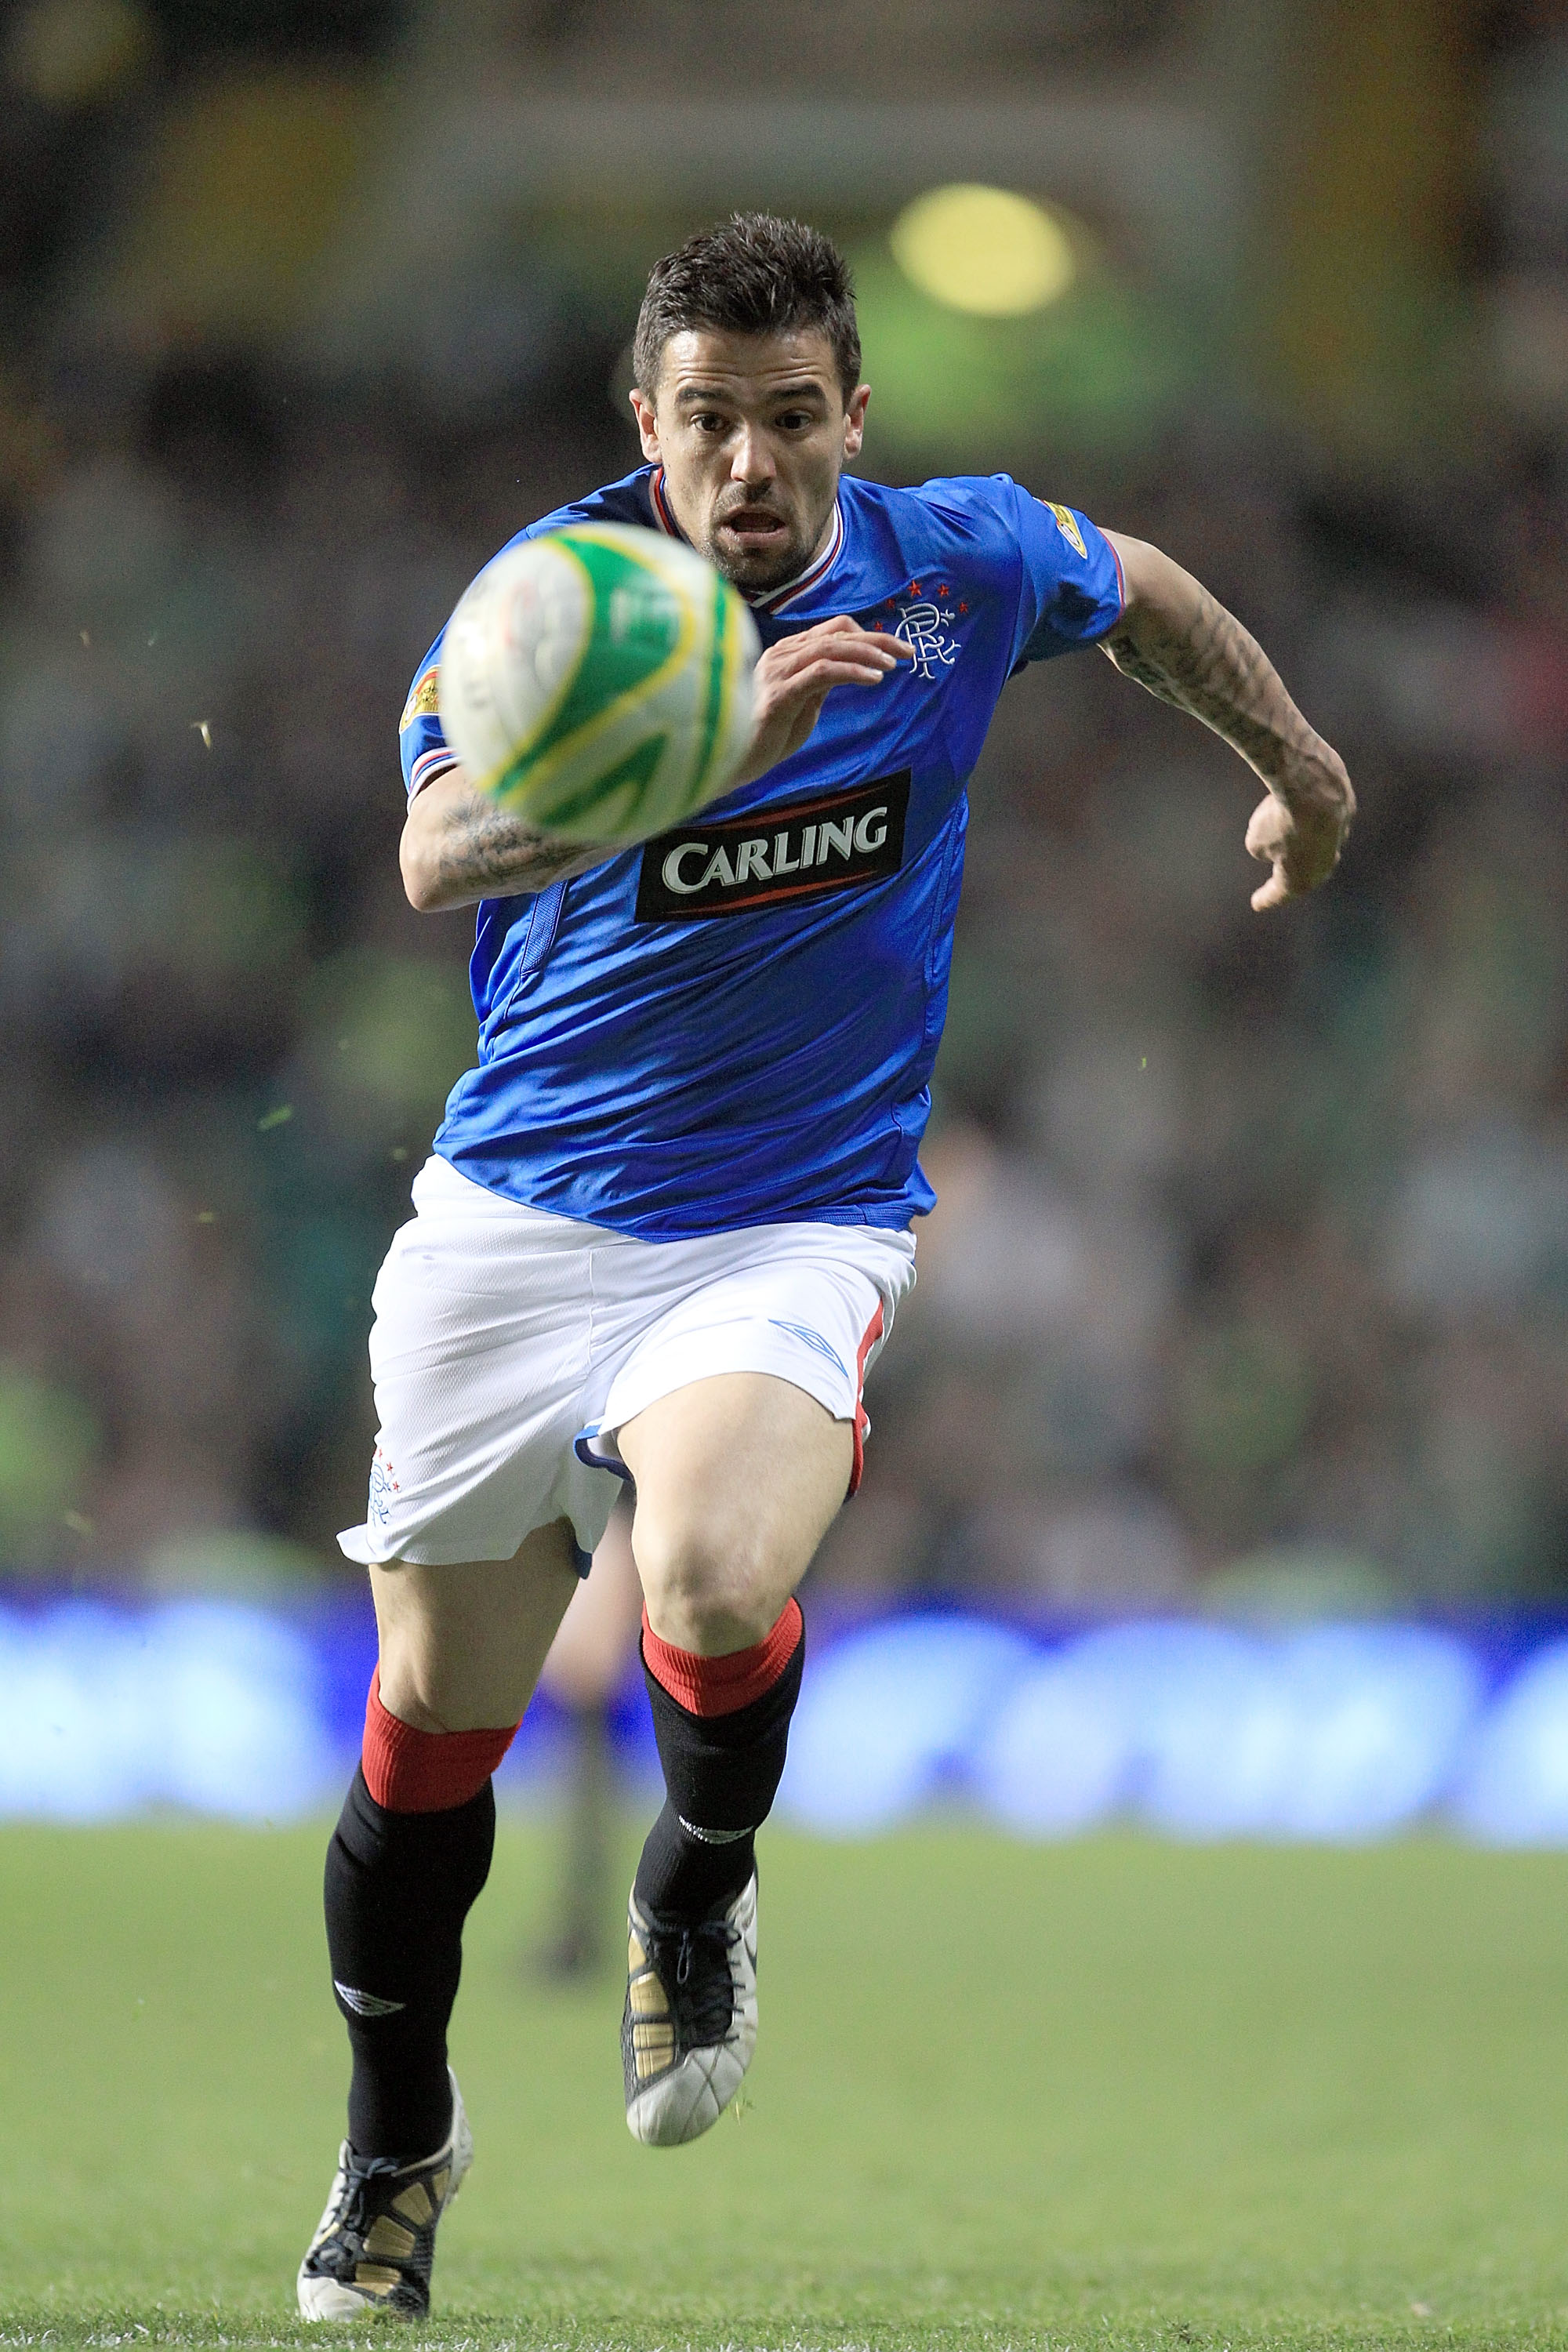 GLASGOW, UNITED KINGDOM - MAY 04:  Nacho Novo of Rangers during the Clydesdale Bank Scottish Premier League match between Celtic and Rangers at Celtic Park, on May 4, 2010 in Glasgow, Scotland.  (Photo by David Cannon/Getty Images)